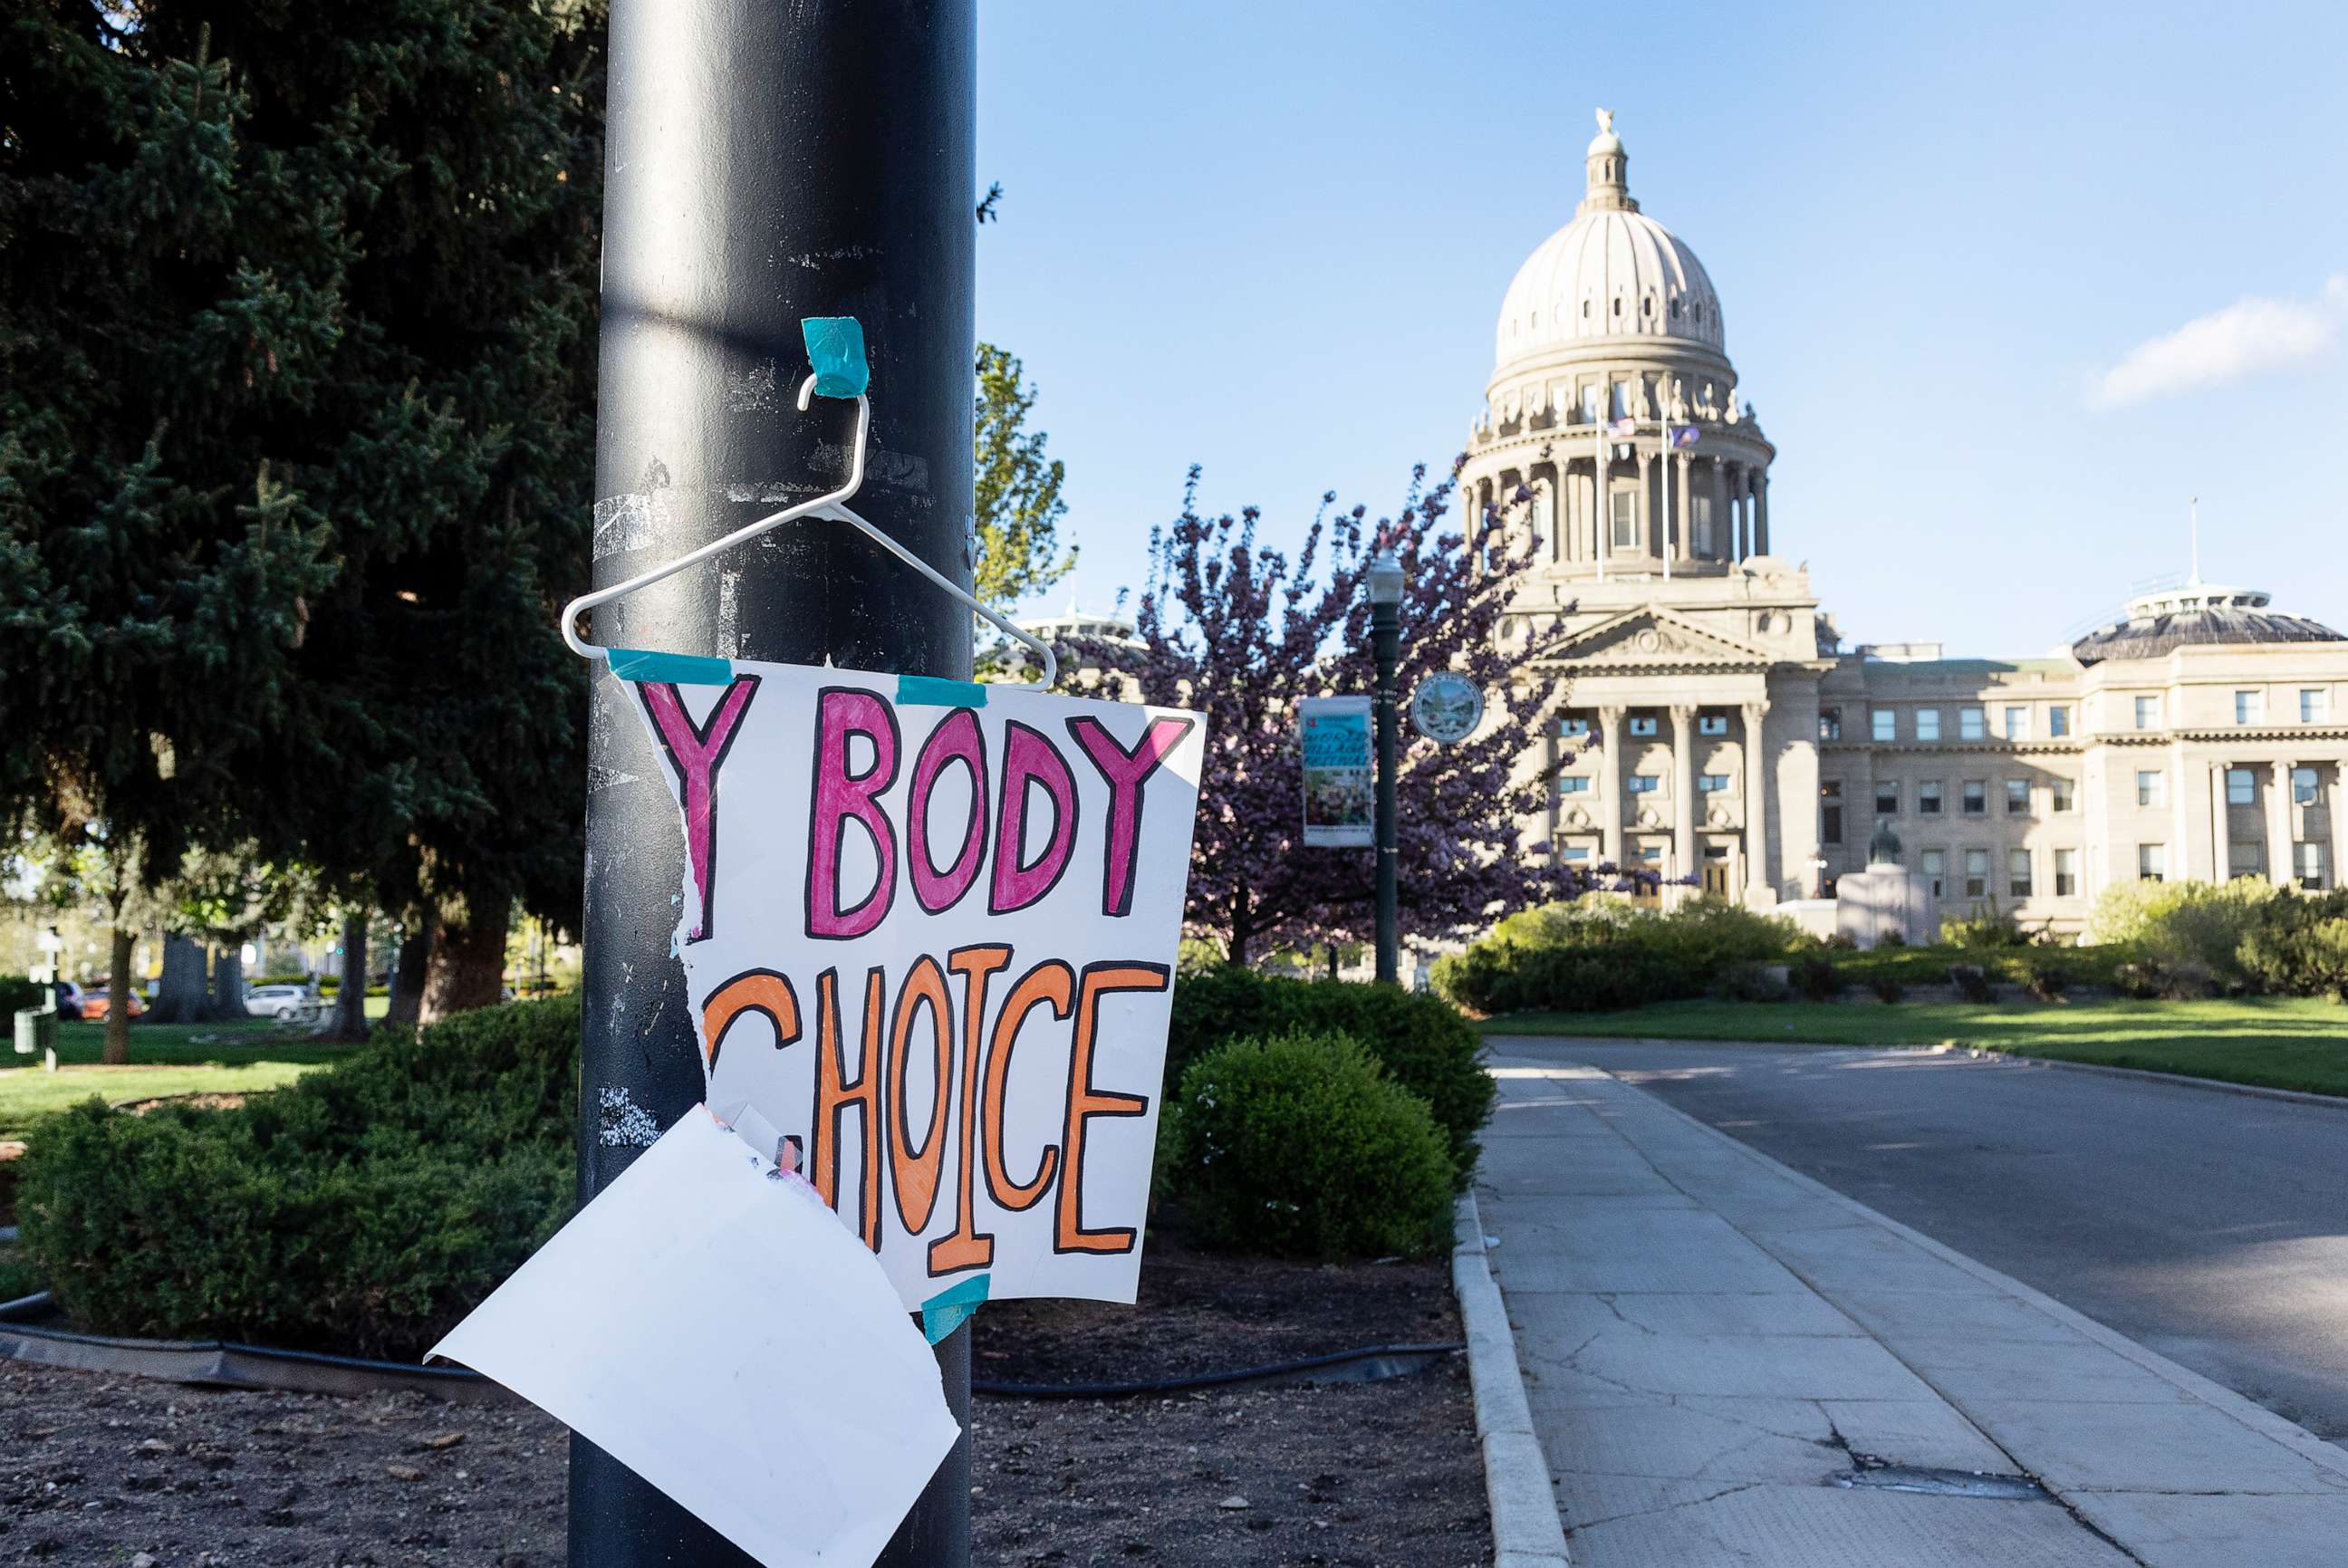 PHOTO: A torn sign reading "My body my choice" on a hanger hangs on a streetlight in front of the Idaho State Capitol Building, May 3, 2022.